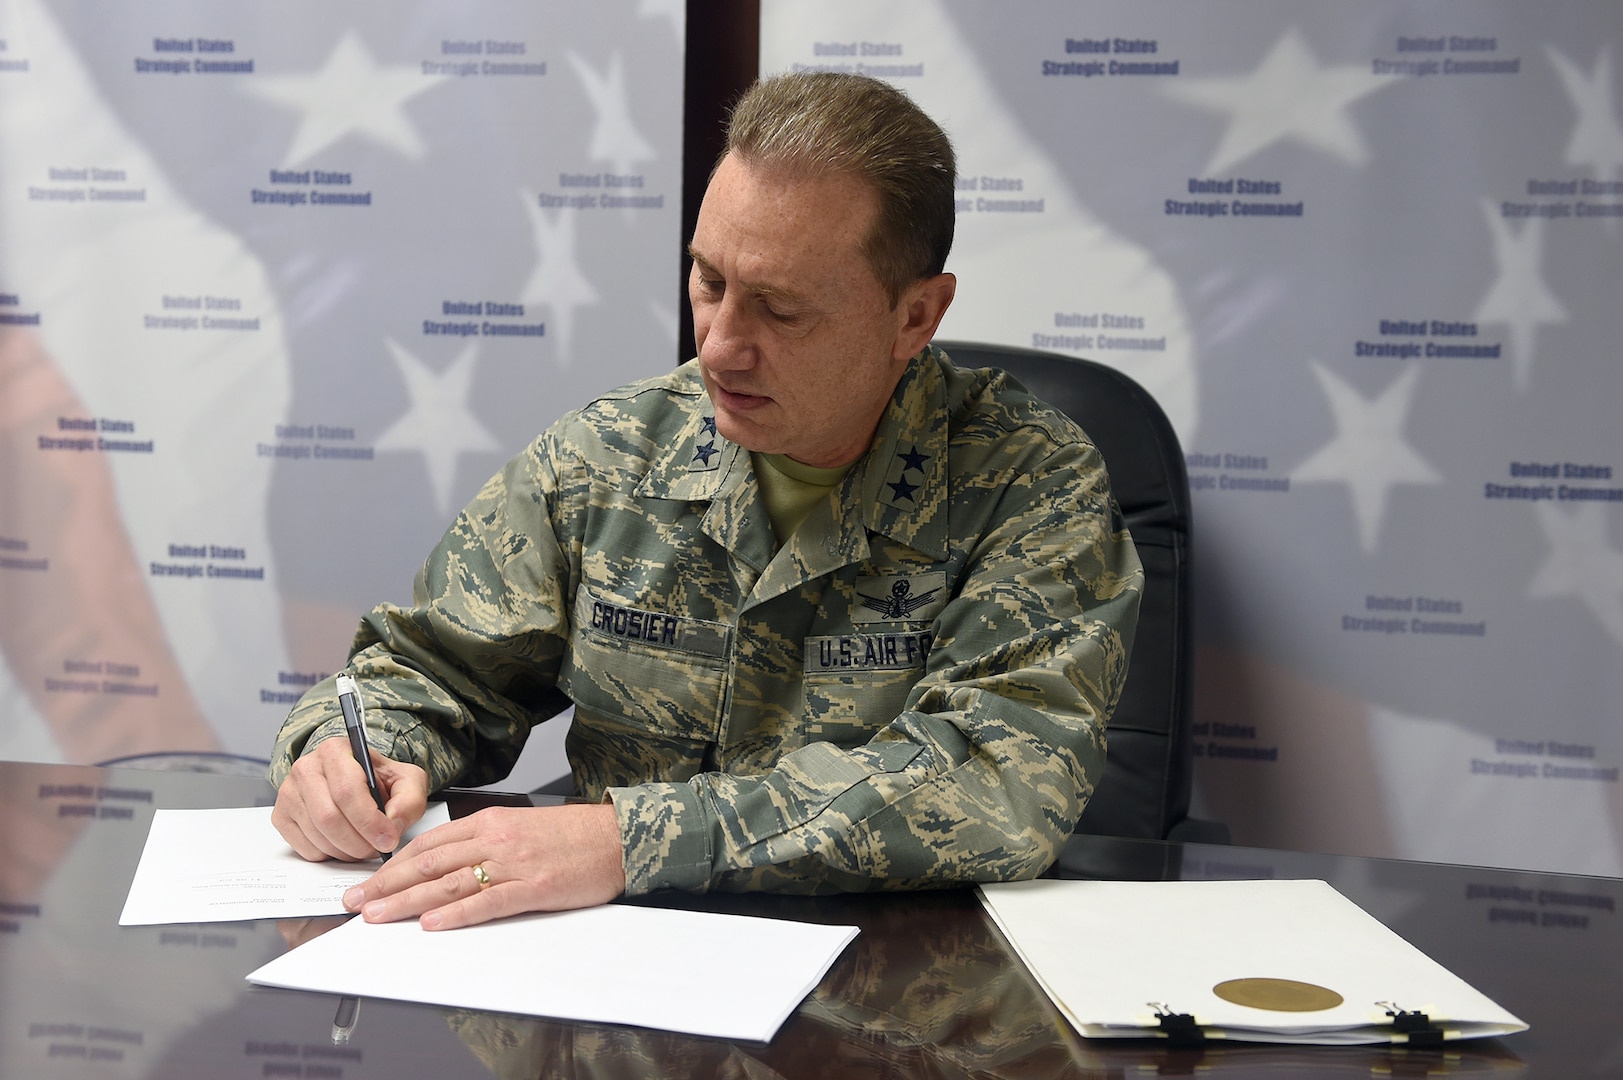 U.S. Air Force Maj. Gen. Clinton E. Crosier, U.S. Strategic Command (USSTRATCOM) director of plans and policy, signs a memorandum of understanding (MOU) at USSTRATCOM headquarters, Feb. 7, 2017, to share space situational awareness (SSA) services and information with the Belgium Federal Science Policy Office. The MOU – also signed by Ms. Elke Sleurs, Belgium’s secretary of state for science policy, in Brussels, Jan. 31, 2017 – will enhance awareness within the space domain and increase the safety of spaceflight operations for the U.S. and Belgium. Belgium joins 11 nations (the United Kingdom, the Republic of Korea, France, Canada, Italy, Japan, Israel, Spain, Germany, Australia and the United Arab Emirates), two intergovernmental organizations (the European Space Agency and the European Organization for the Exploitation of Meteorological Satellites) and more than 50 commercial satellite owner/operator/launchers already participating in SSA data-sharing agreements with USSTRATCOM. SSA data-sharing agreements enhance multinational space cooperation and streamline the process for USSTRATCOM partners to request specific information gathered by USSTRATCOM’s Joint Space Operations Center at Vandenberg Air Force Base, Calif. 